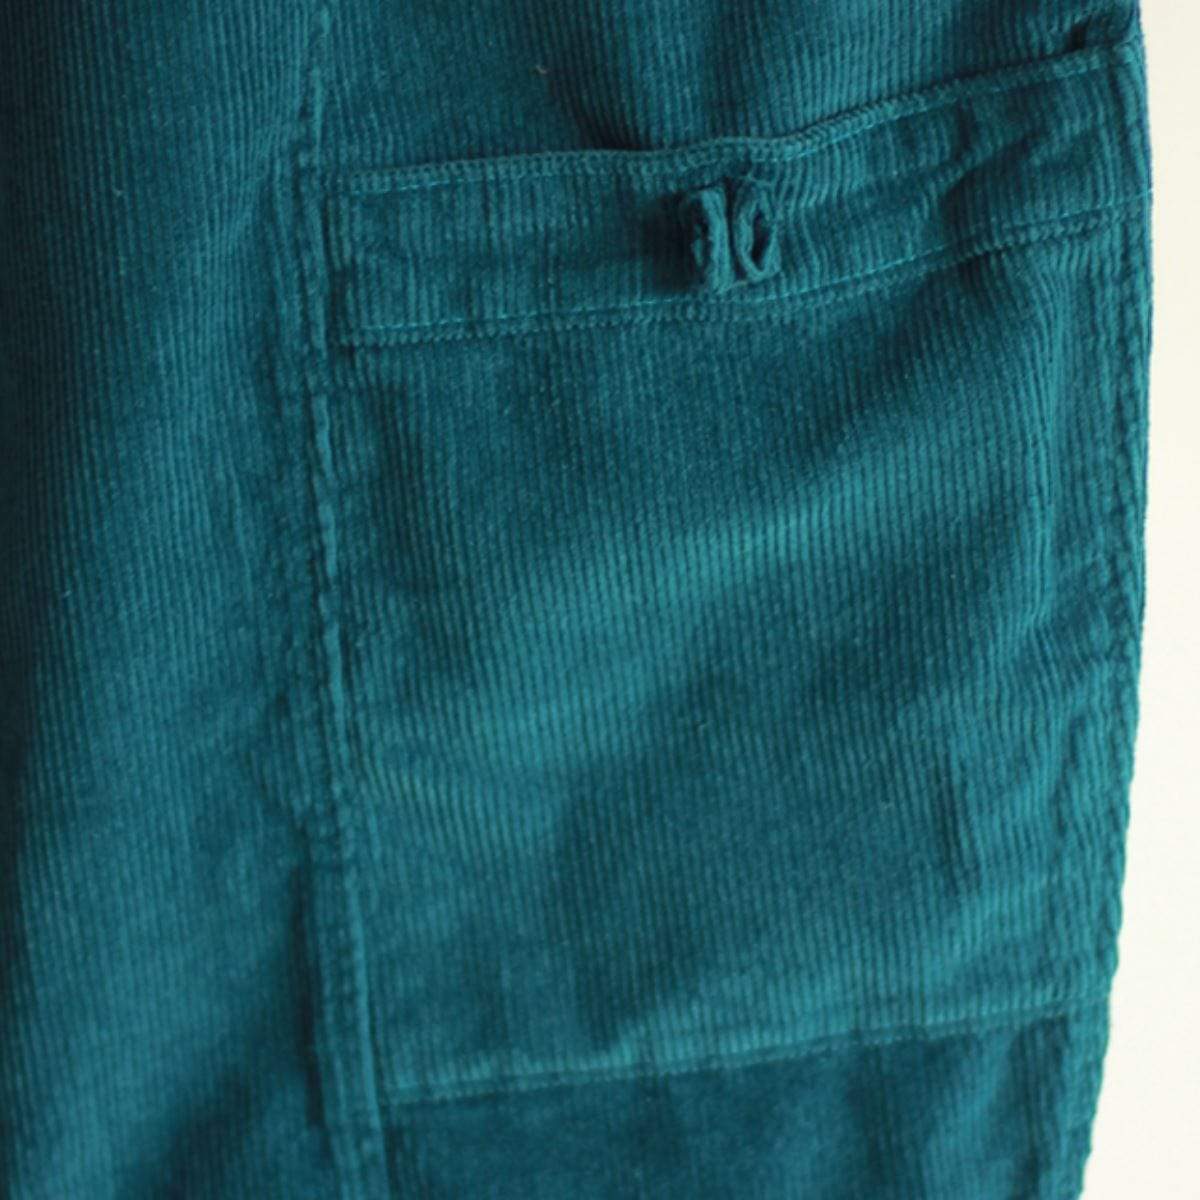 Loose Corduroy Pants With Pockets